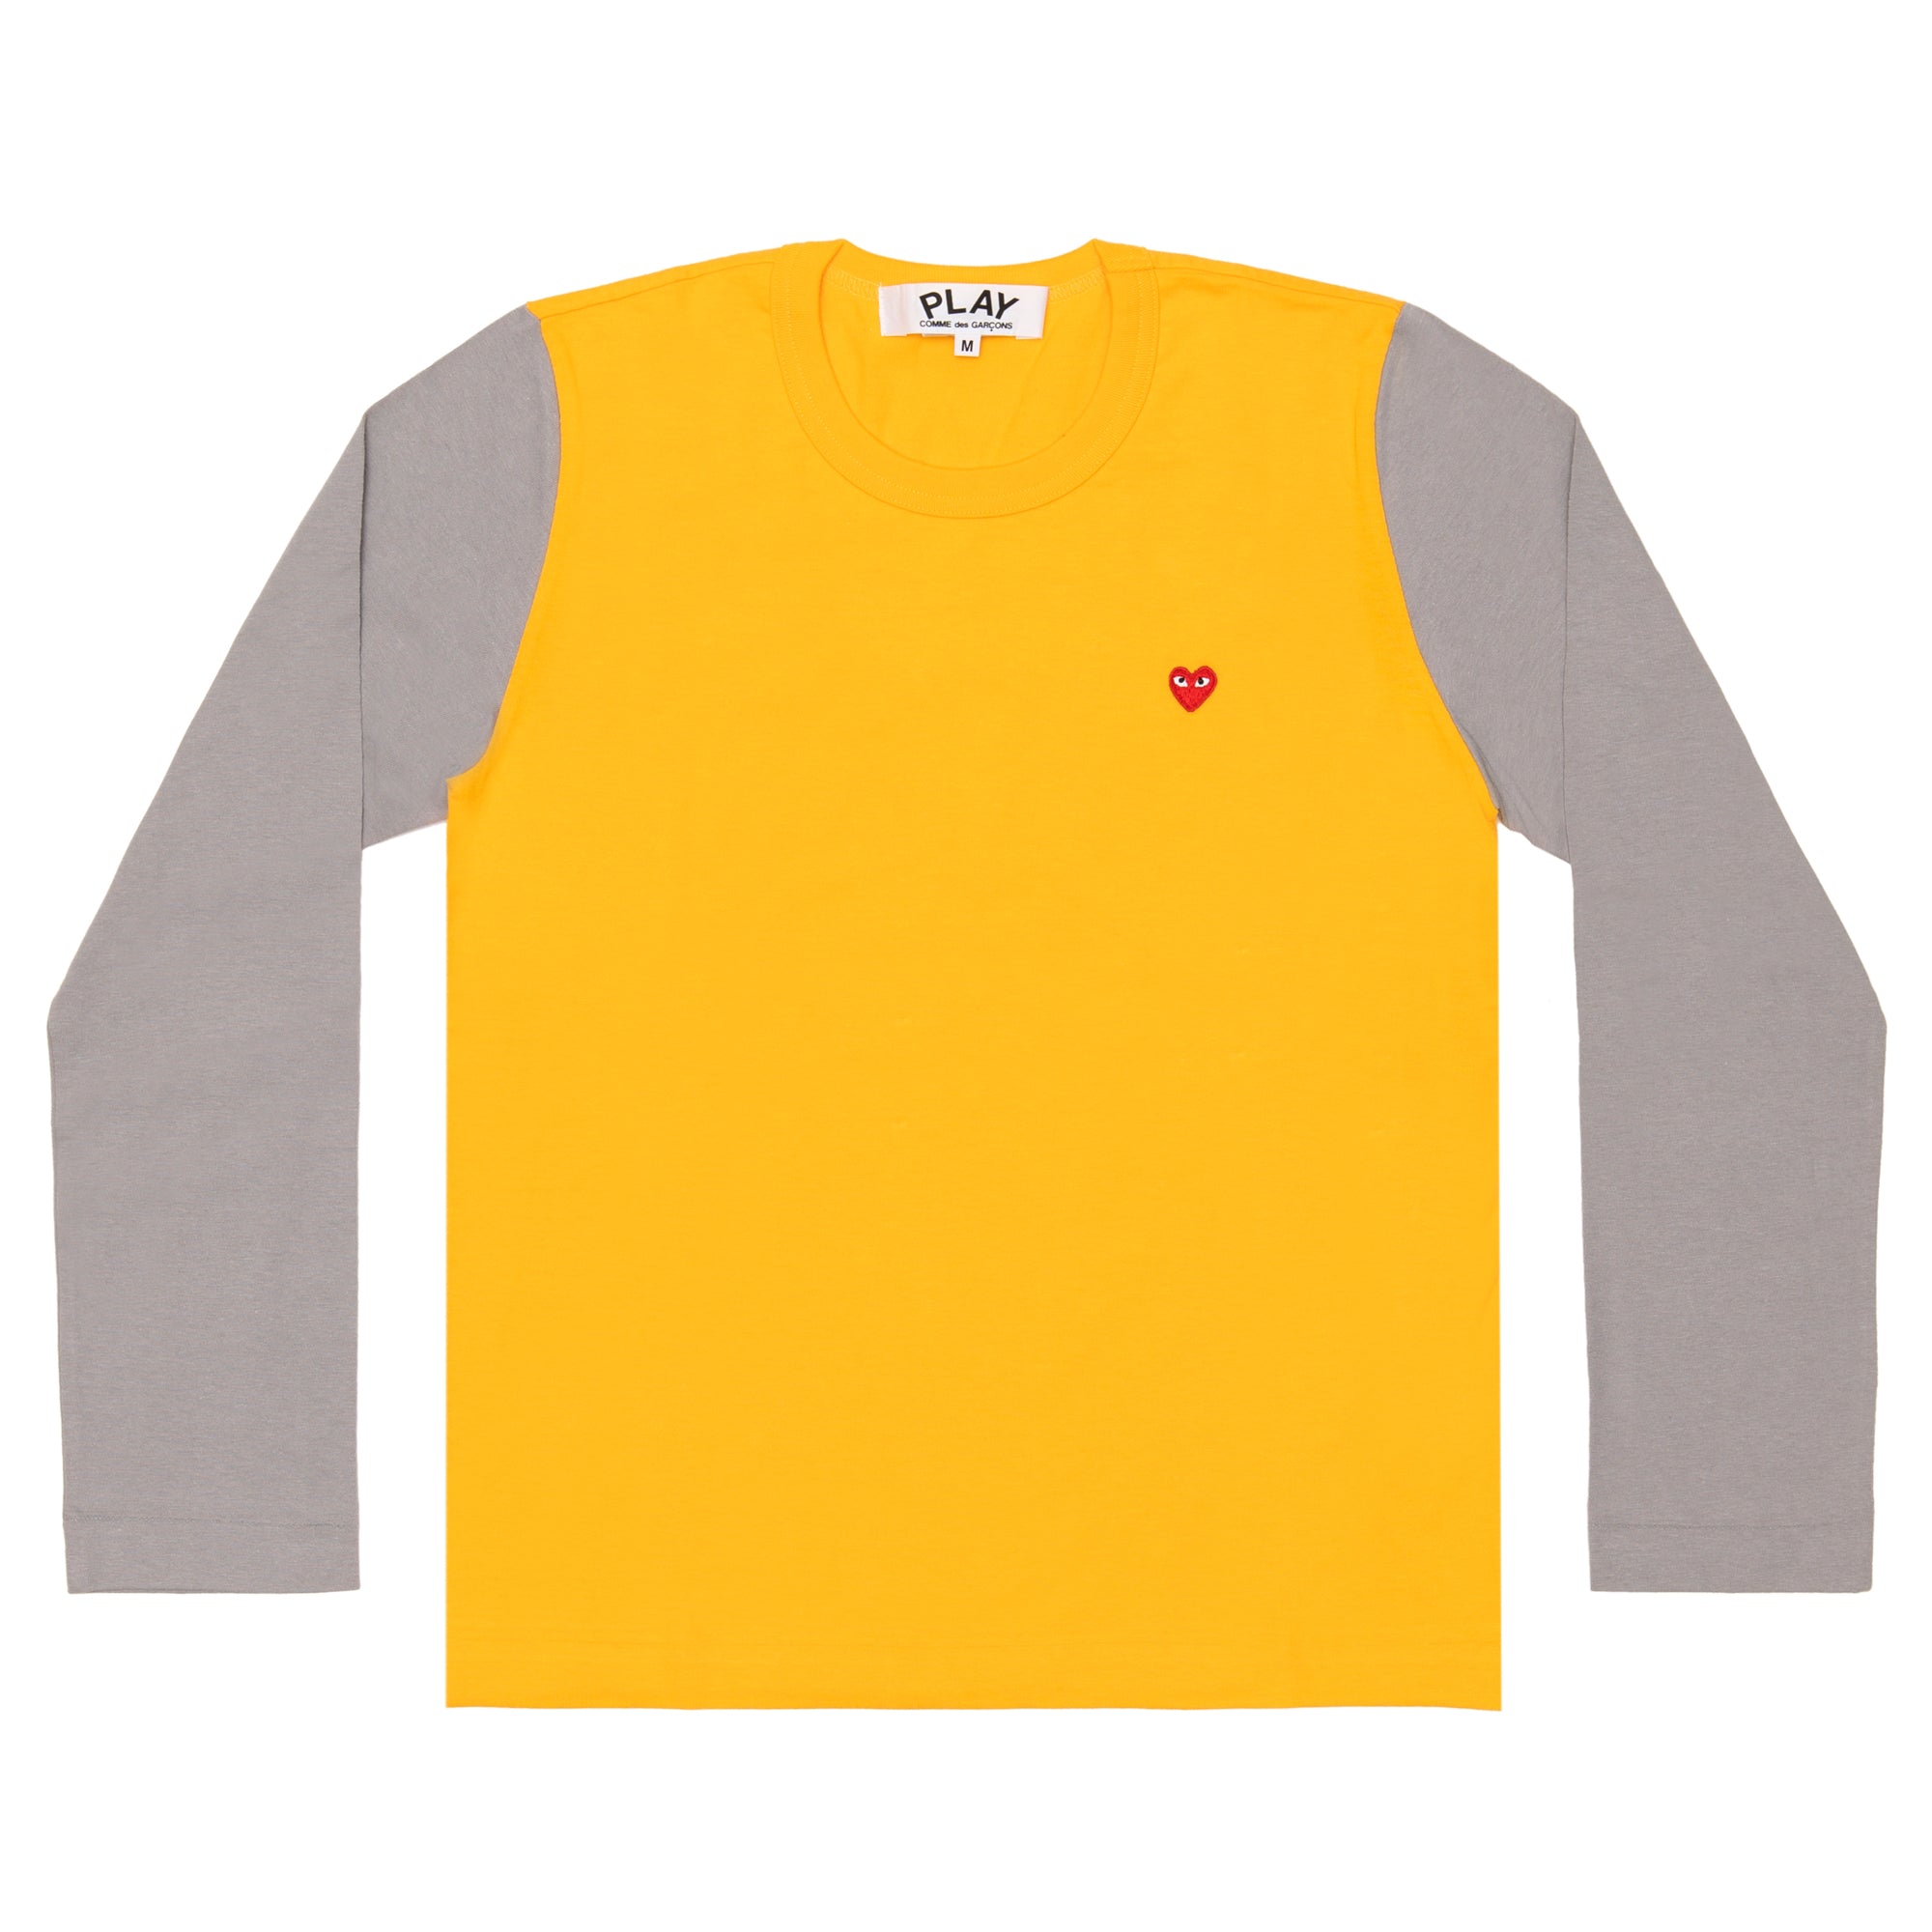 PLAY COMME des GARÇONS Small Red Heart Coloured L/S T-Shirt (Yellow X Gray) Ladies: ¥7,920 Men's: ¥8,360